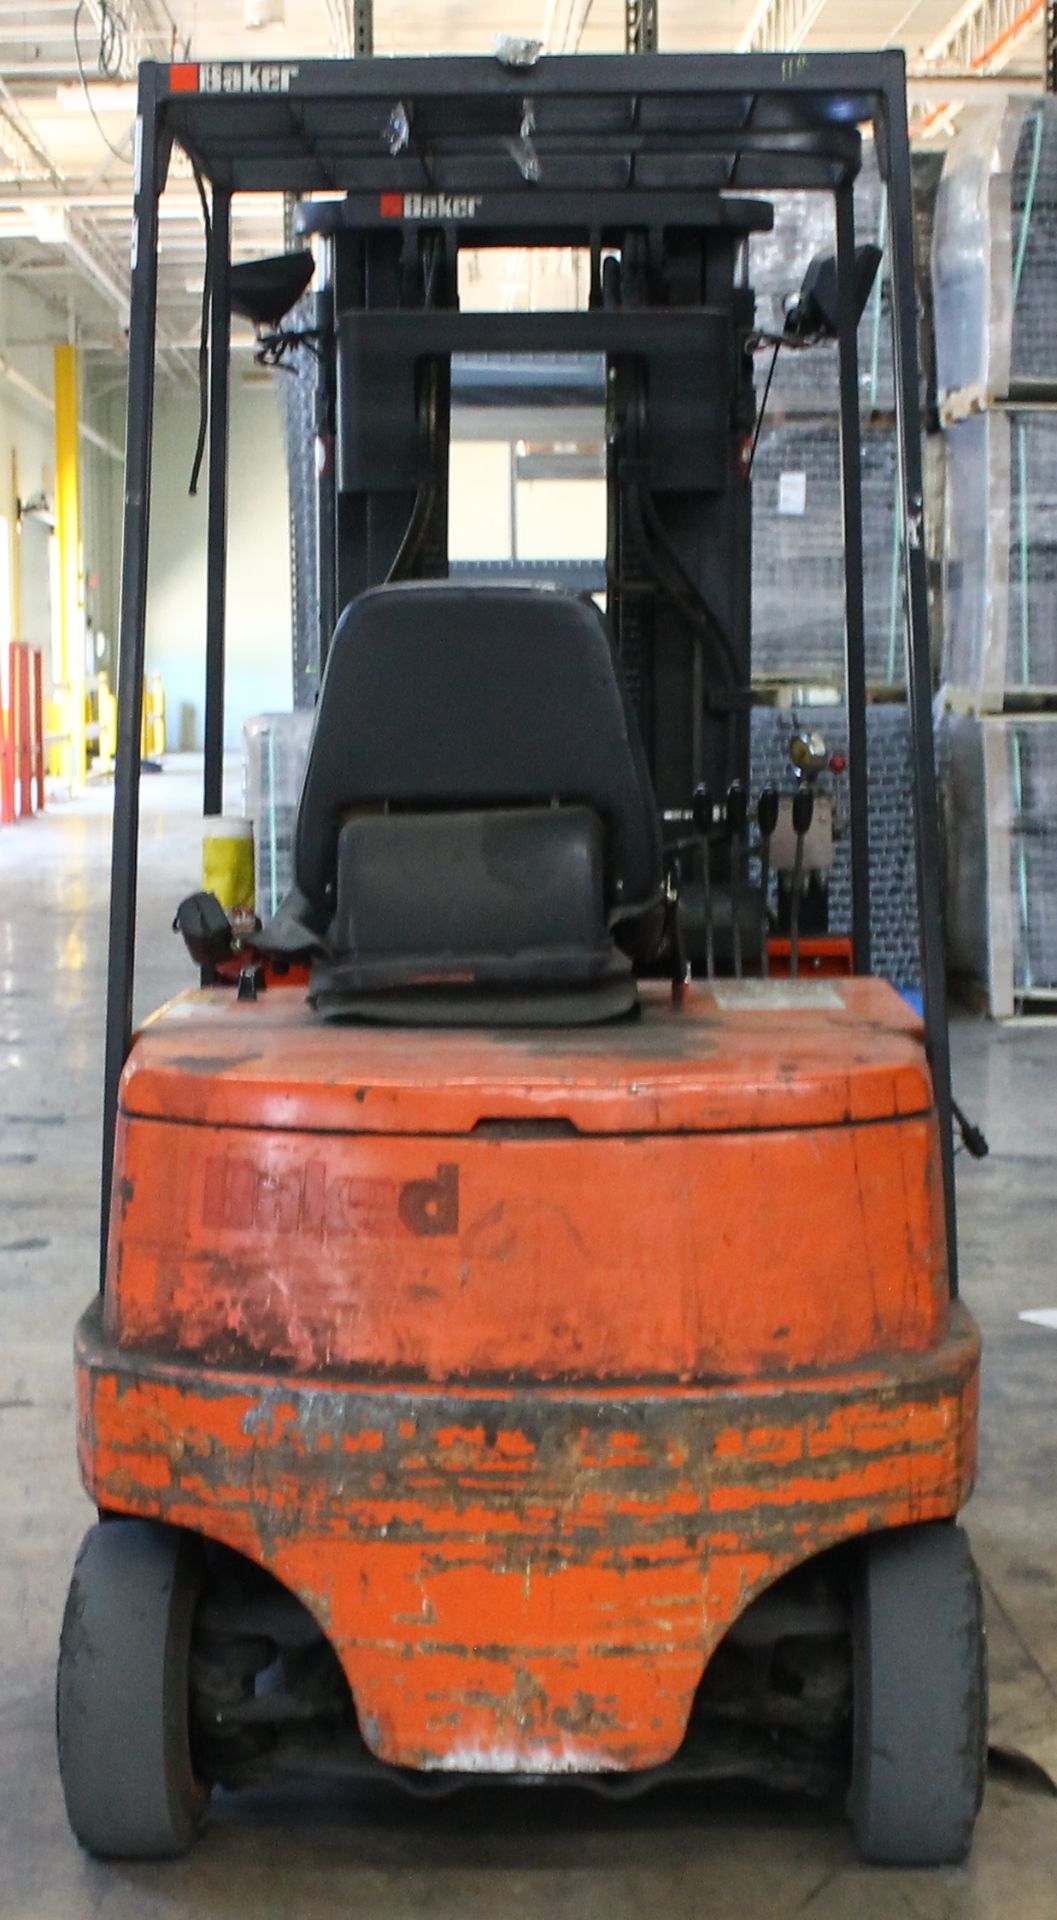 BAKER 4000 LBS CAPACITY ELECTRIC FORKLIFT - Image 2 of 5